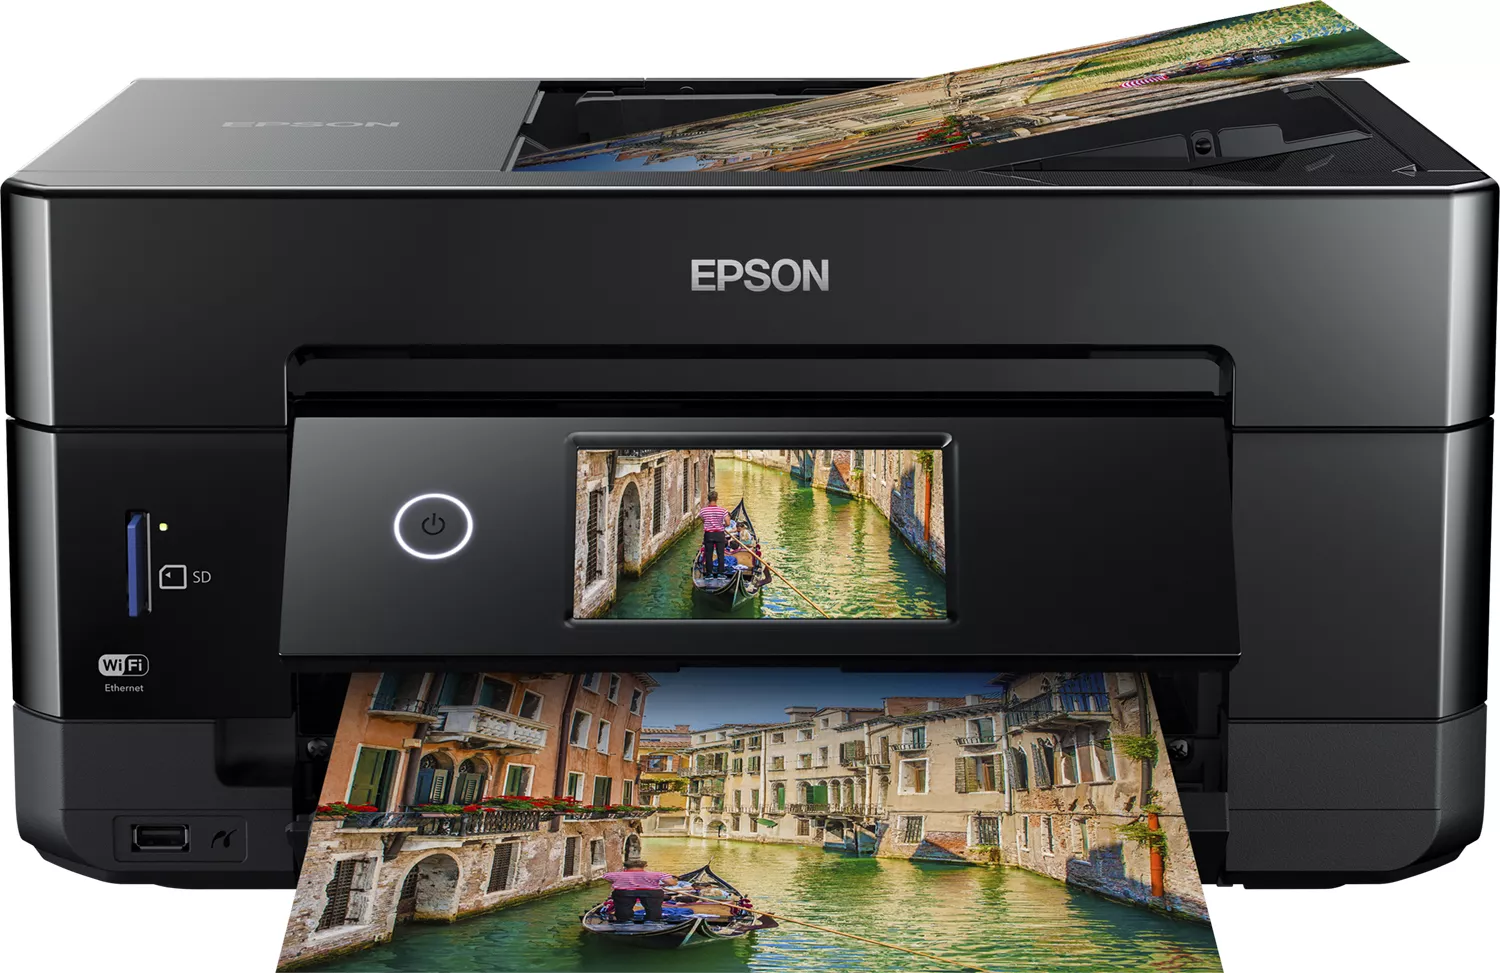 Achat Multifonctions Jet d'encre EPSON Expression Premium XP-7100 Small-in-One MFP sur hello RSE